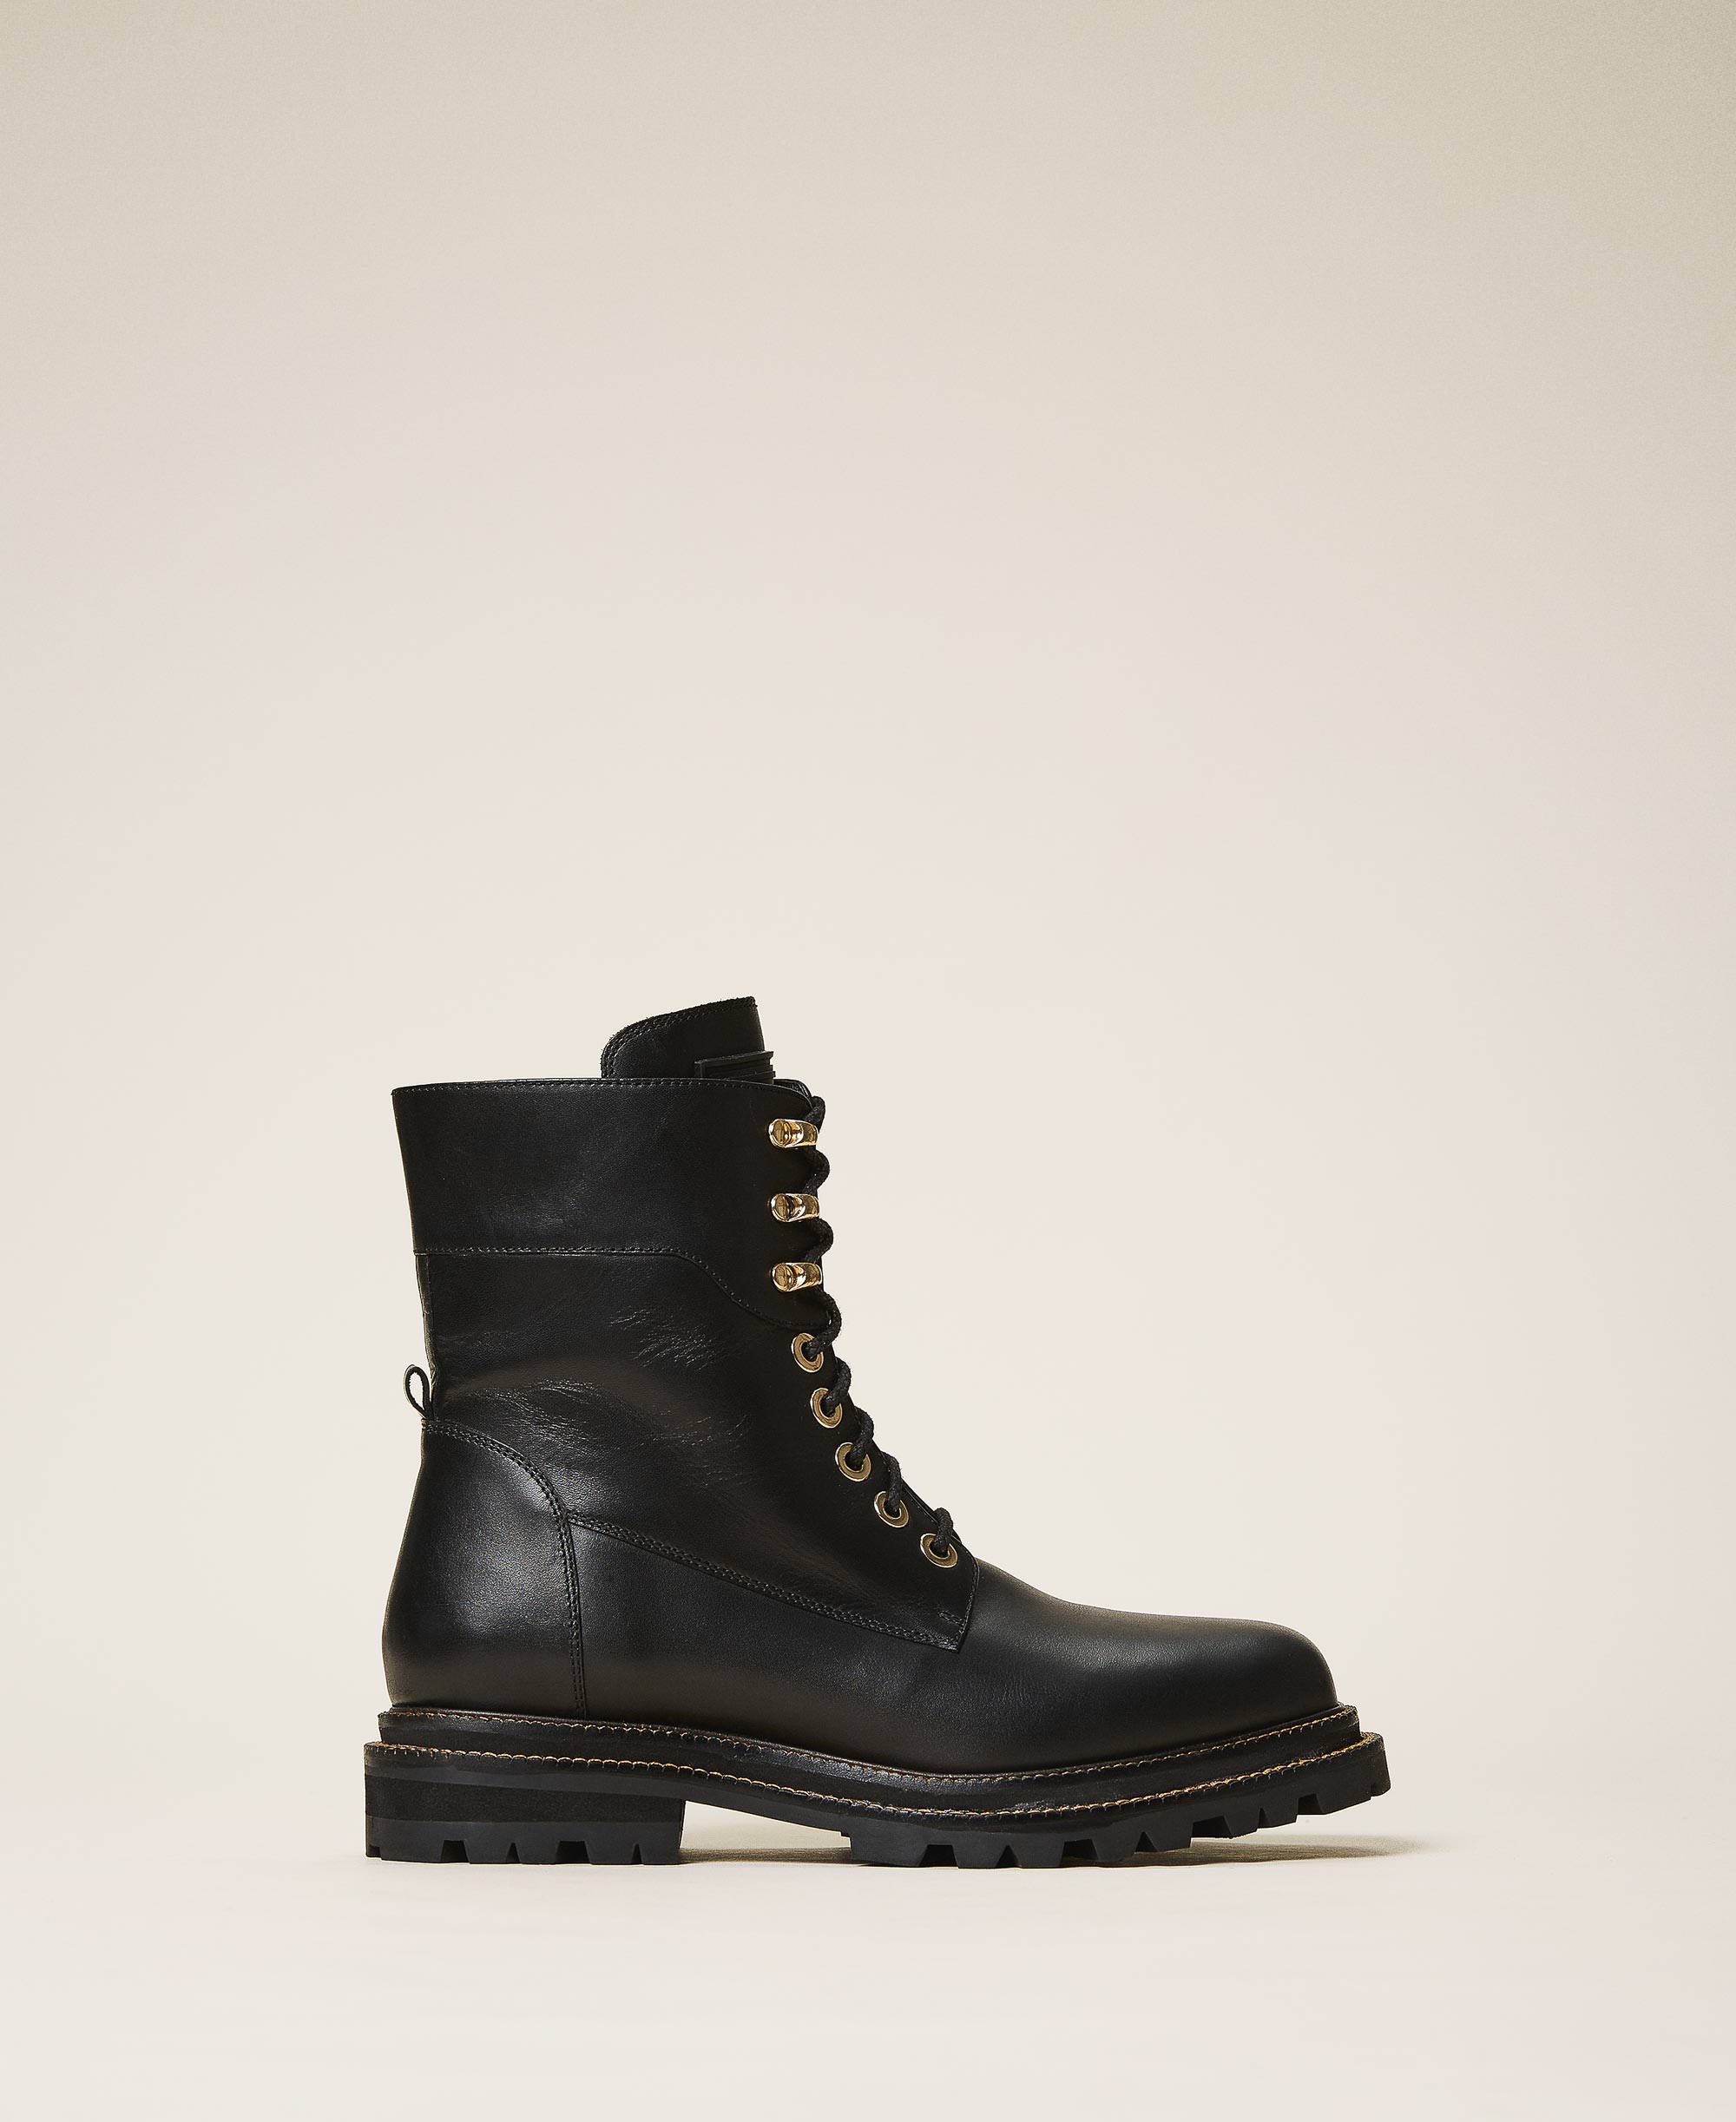 black and gold combat boots